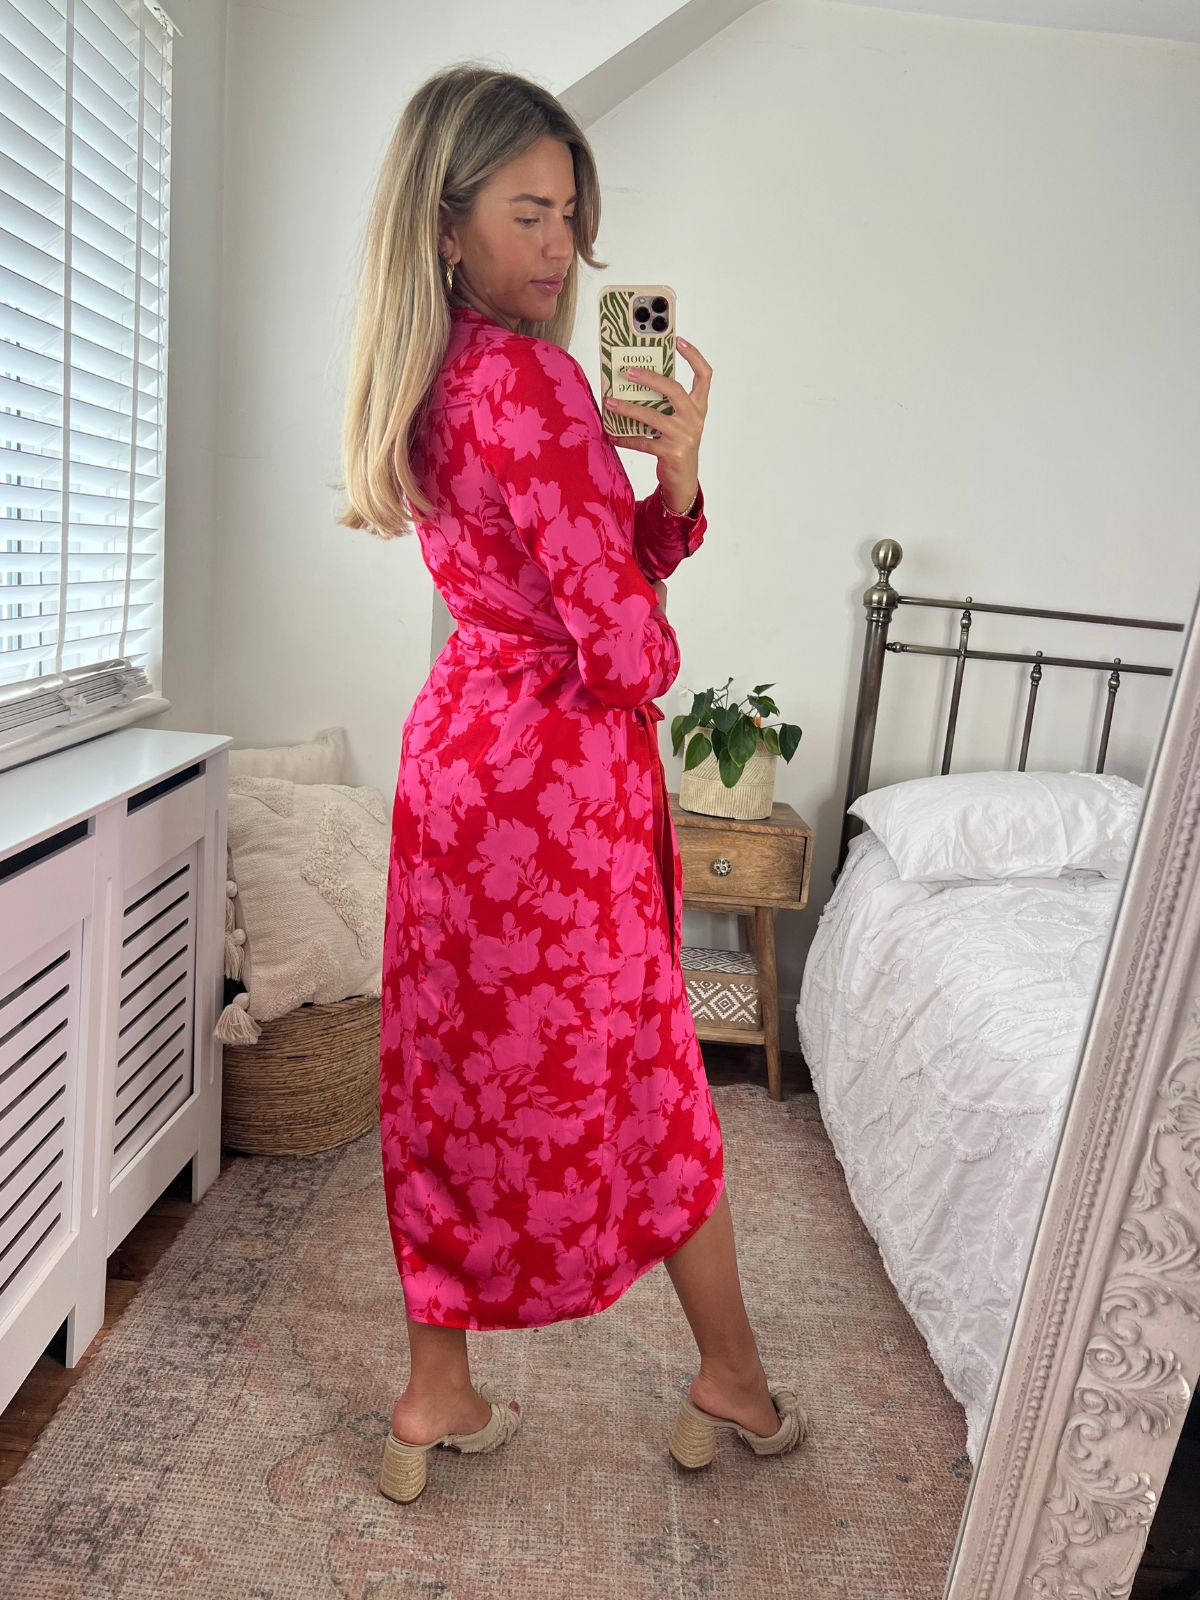 Pink and Red Wrap Dress